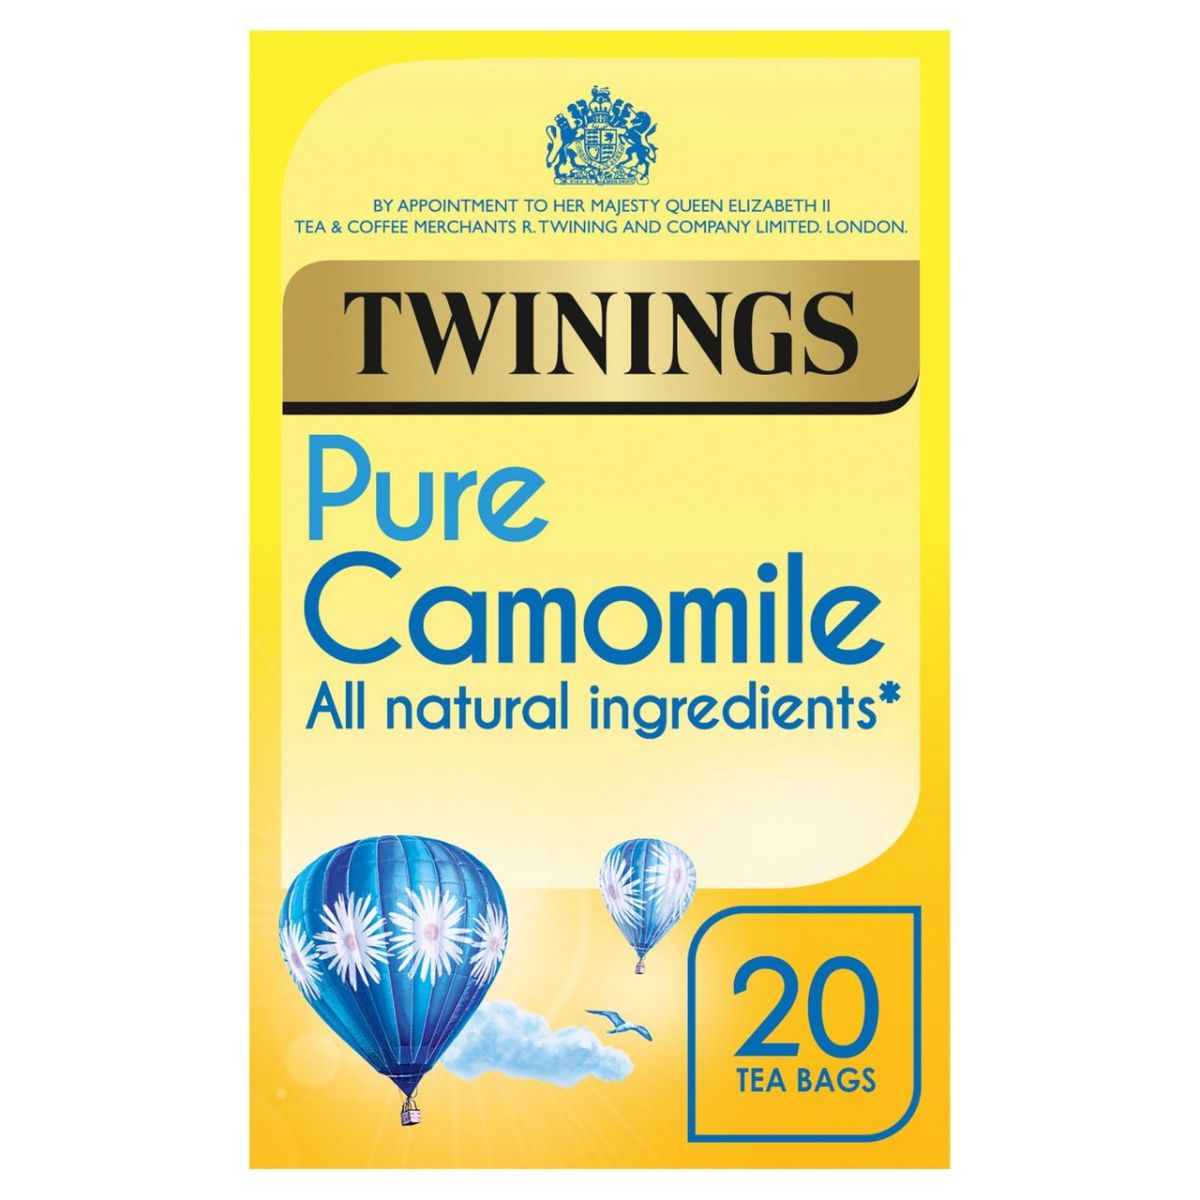 Twinings - Pure Camomile Herbal 20 Teabags - 30g.